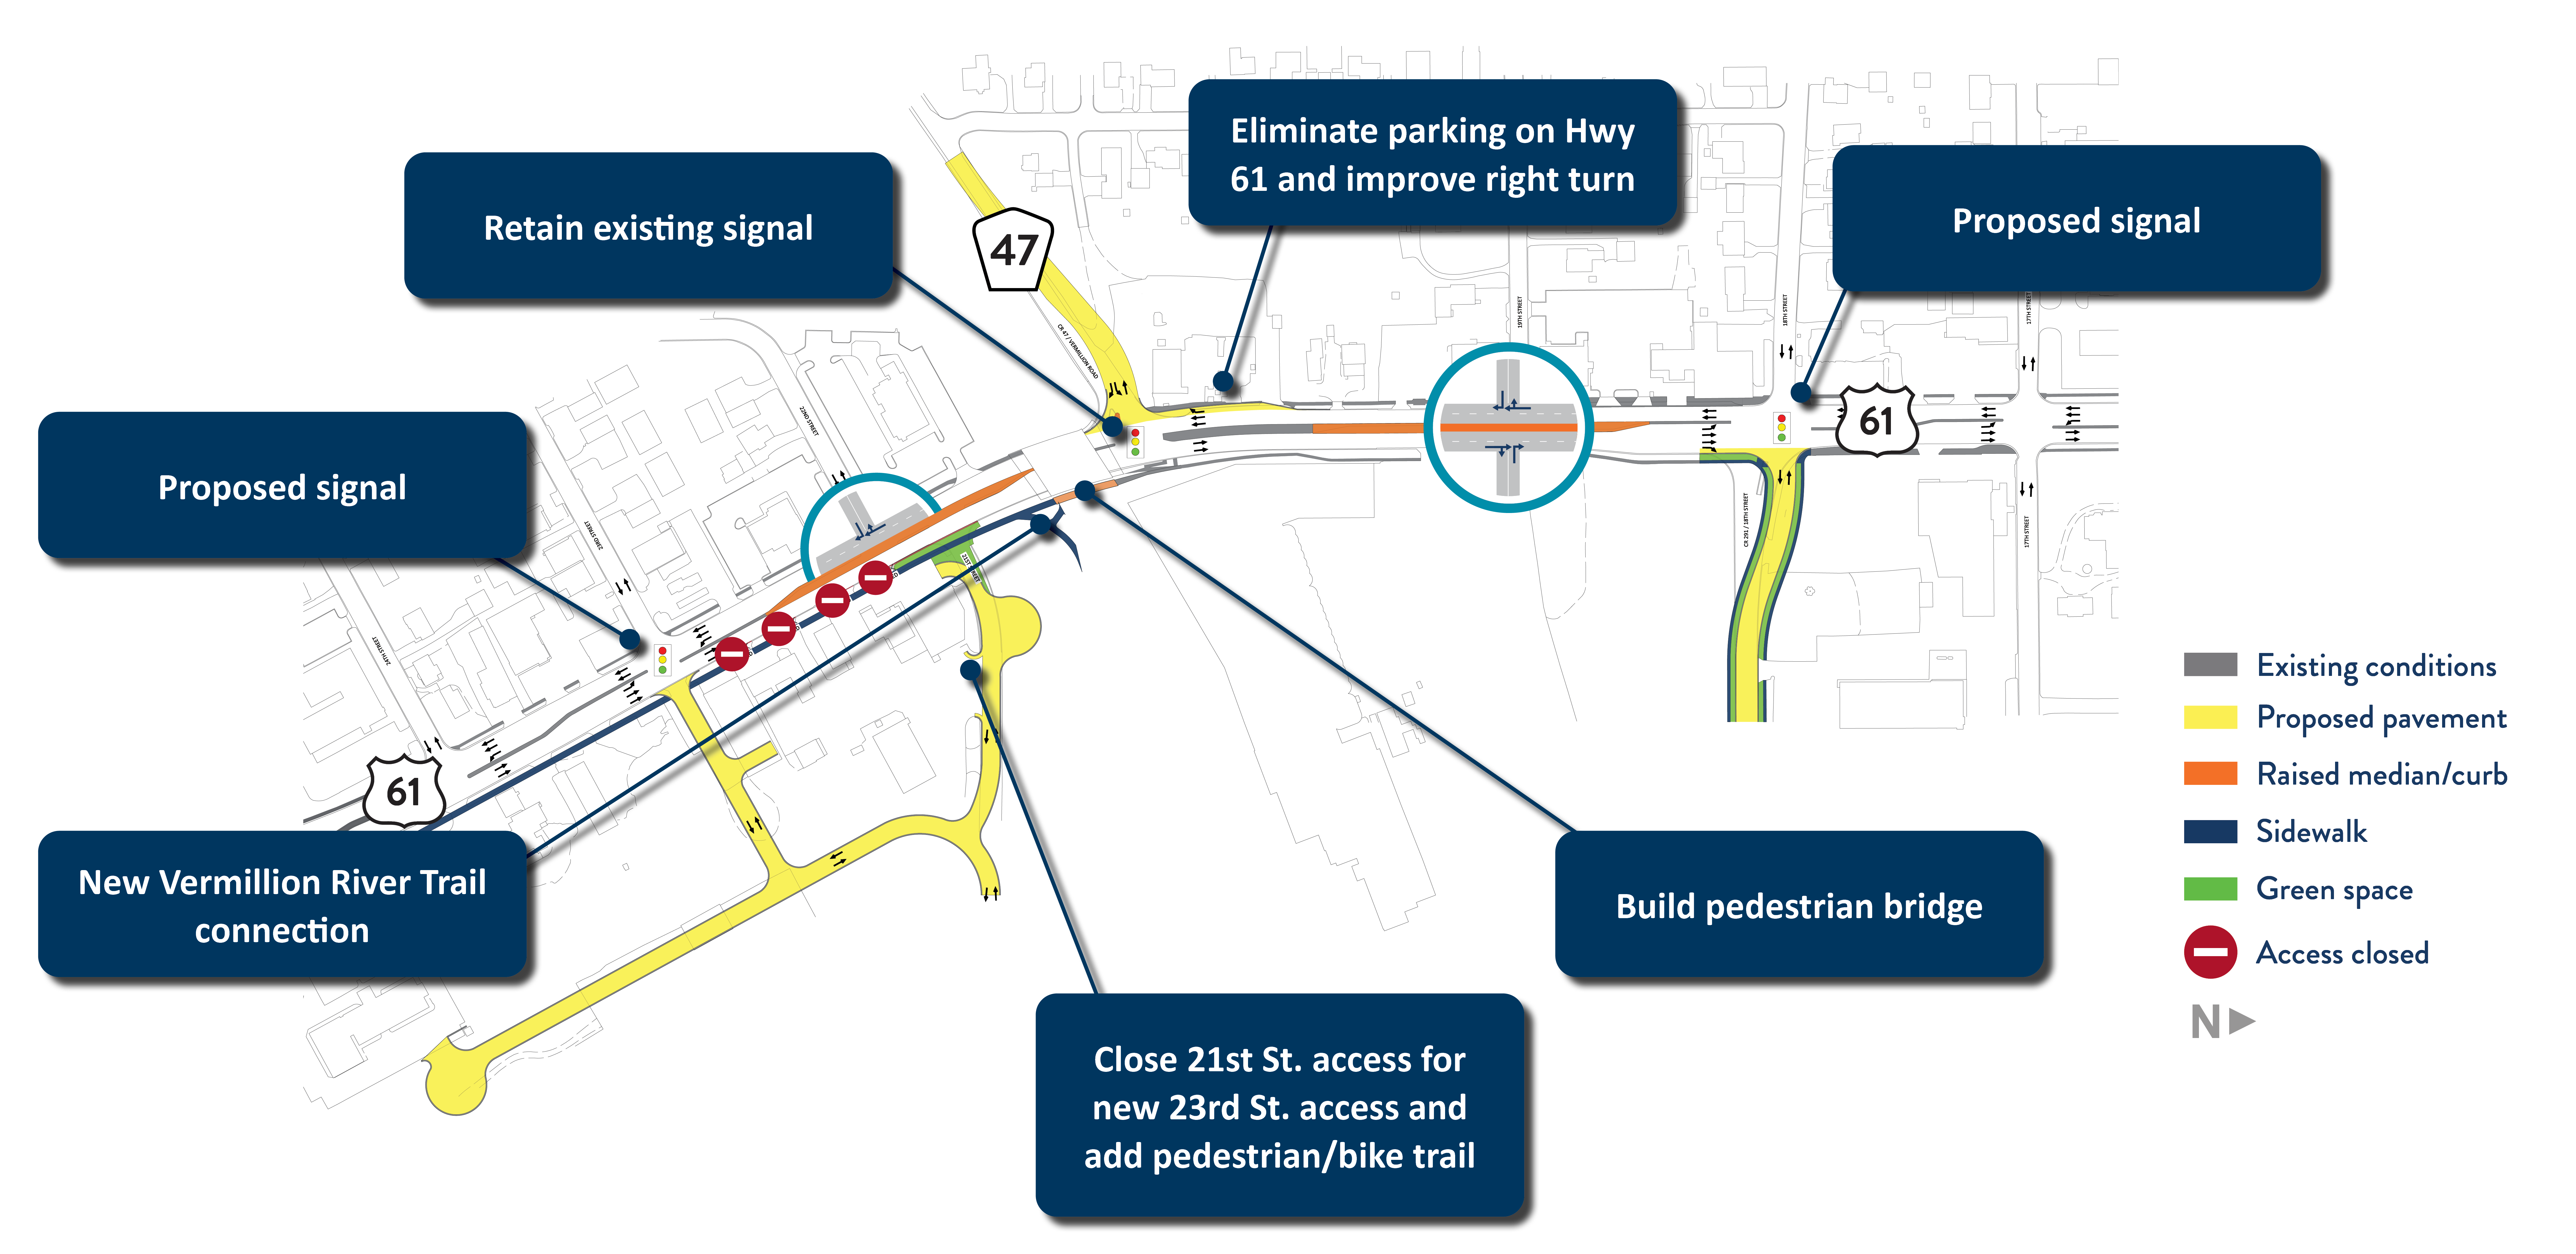 Concept drawing realigns 18th Street and adds signal. Additional improvements include pedestrian bridge over Vermillion River and connection to trail, and improved right-turn lane at County Road 47.